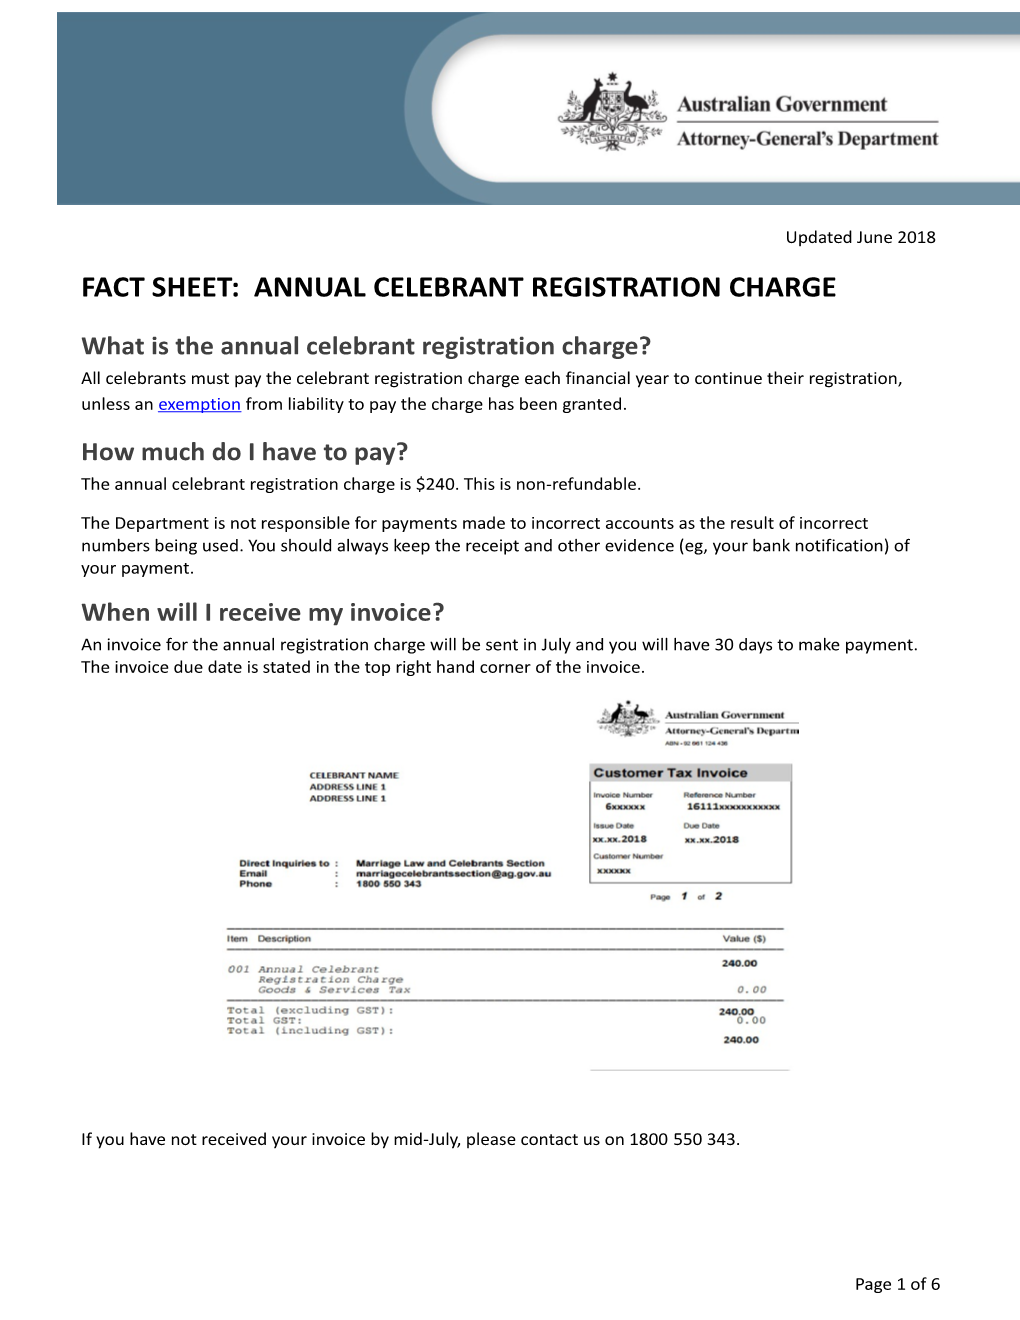 Fact Sheet: Annualcelebrant Registration Charge